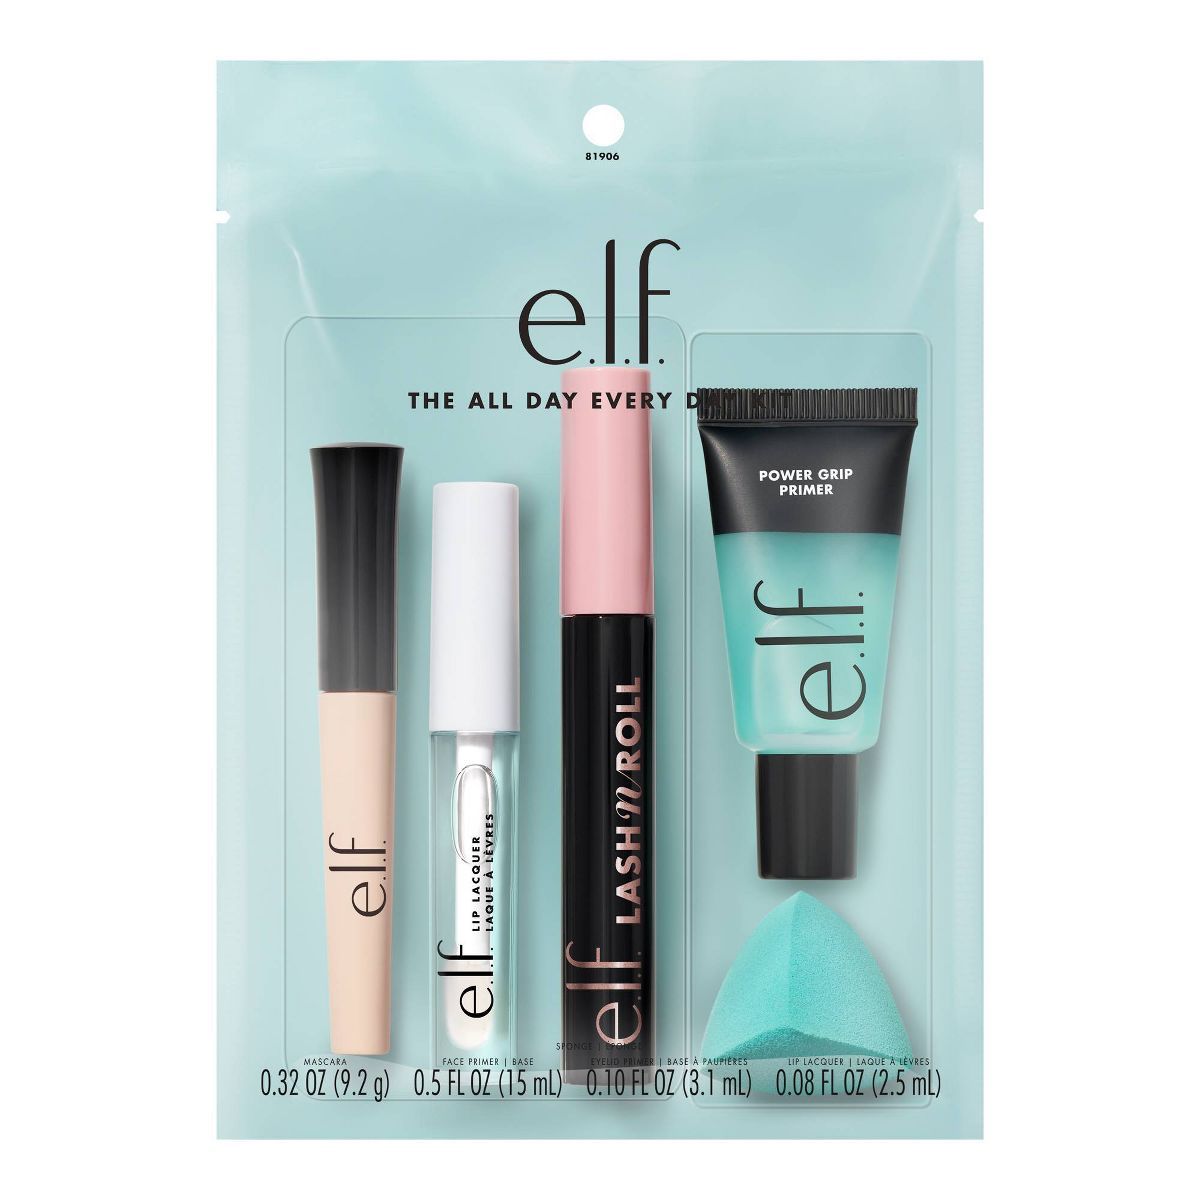 e.l.f. The All Day Every Day Holiday Cosmetics Gift Set - 5ct | Target